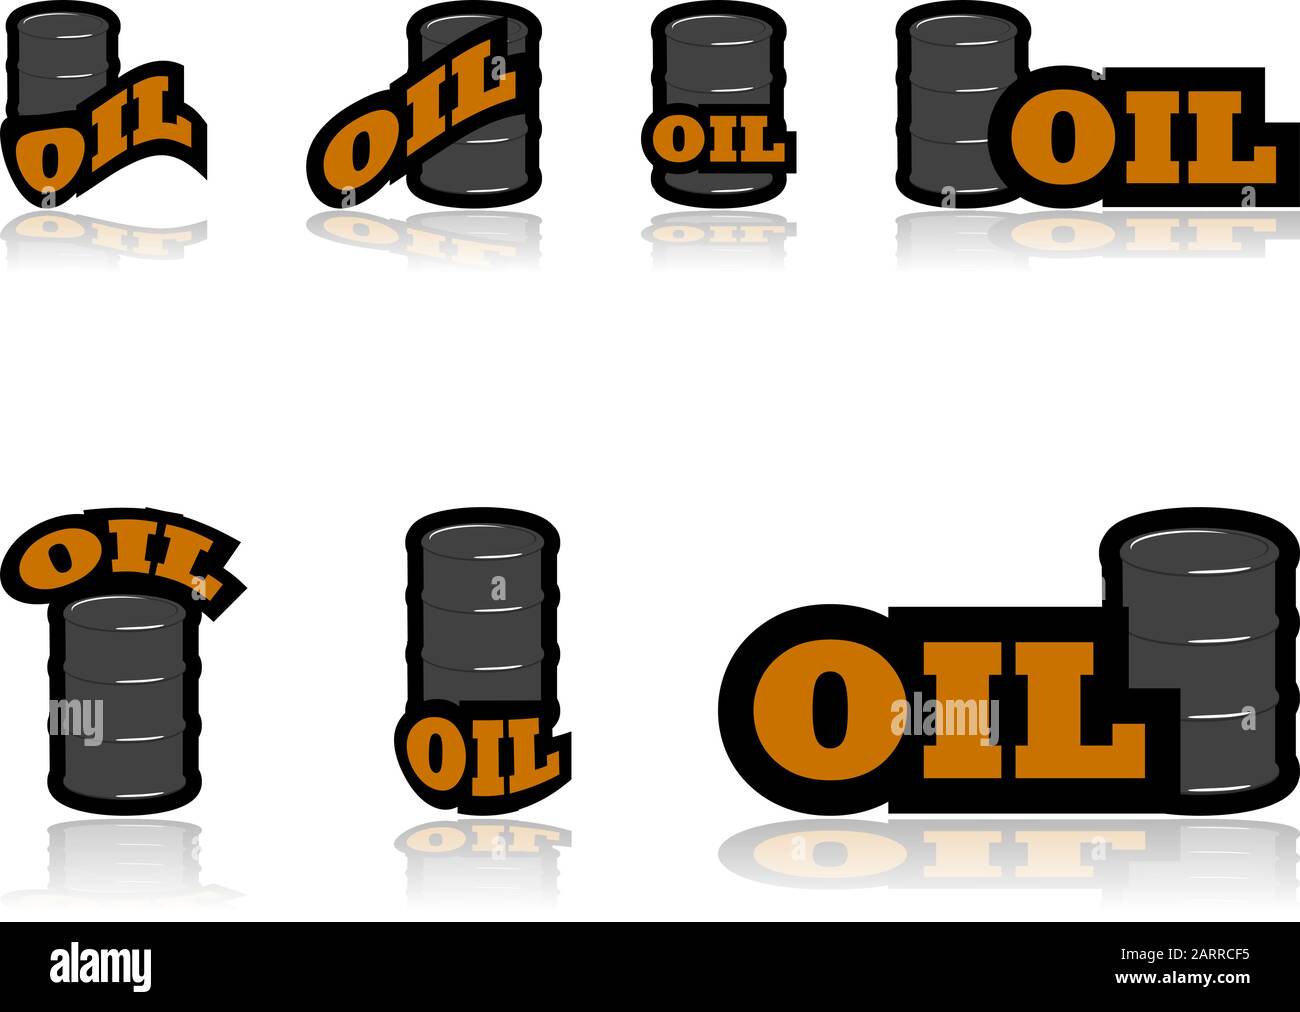 Icon set showing a barrel of oil combined with different representations of the word oil Stock Vector